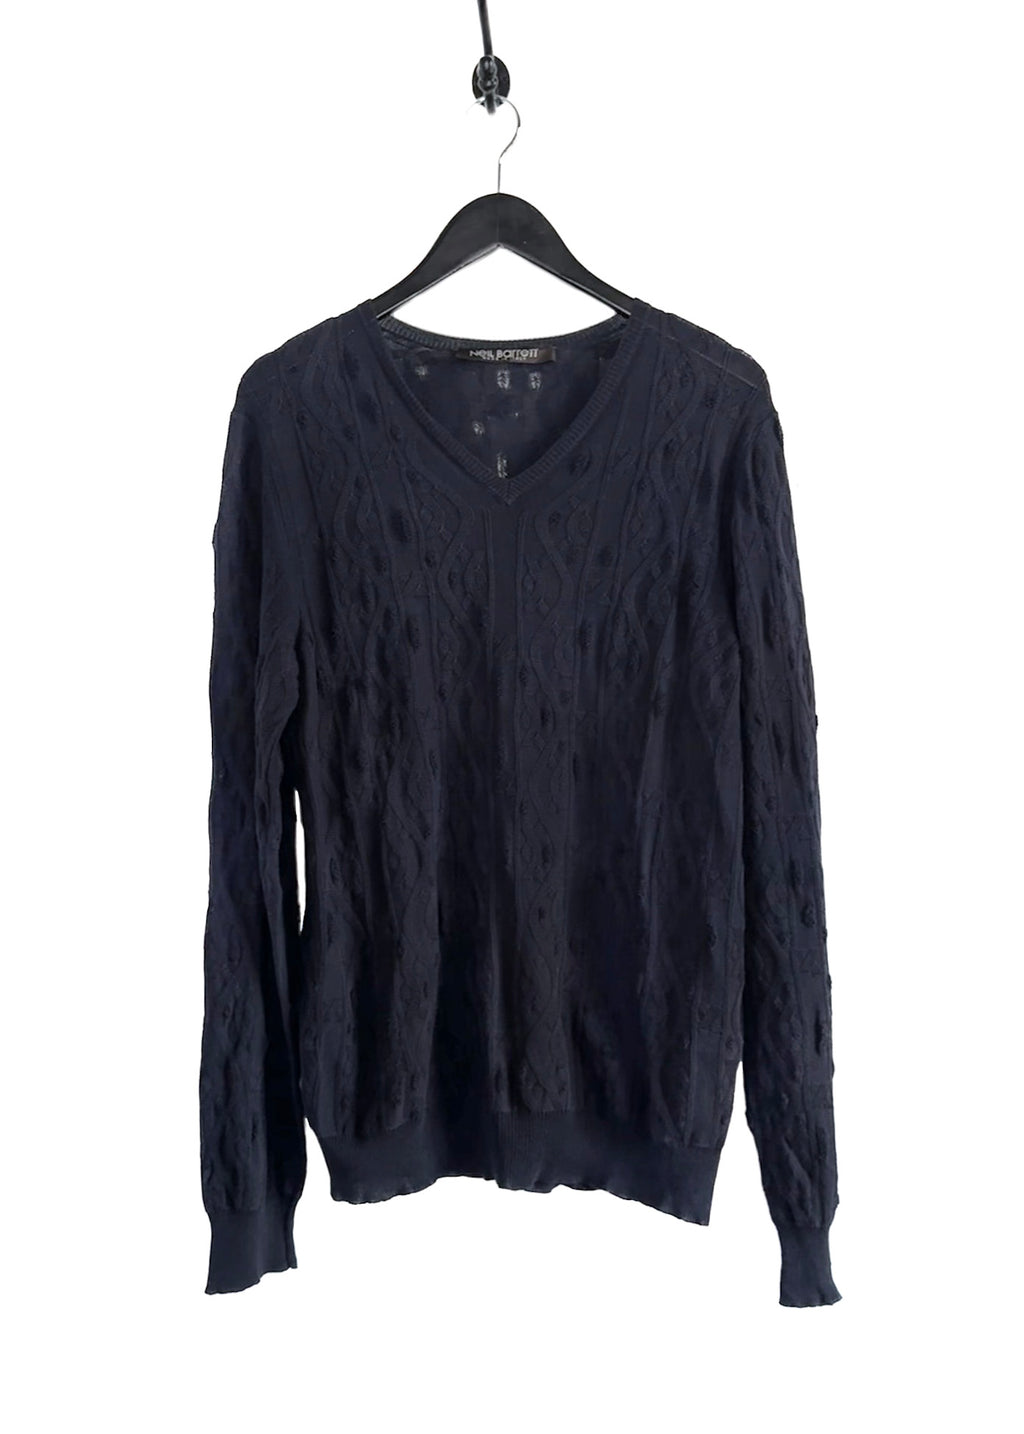 Neil Barrett Navy Distressed Cable Knit Light Sweater